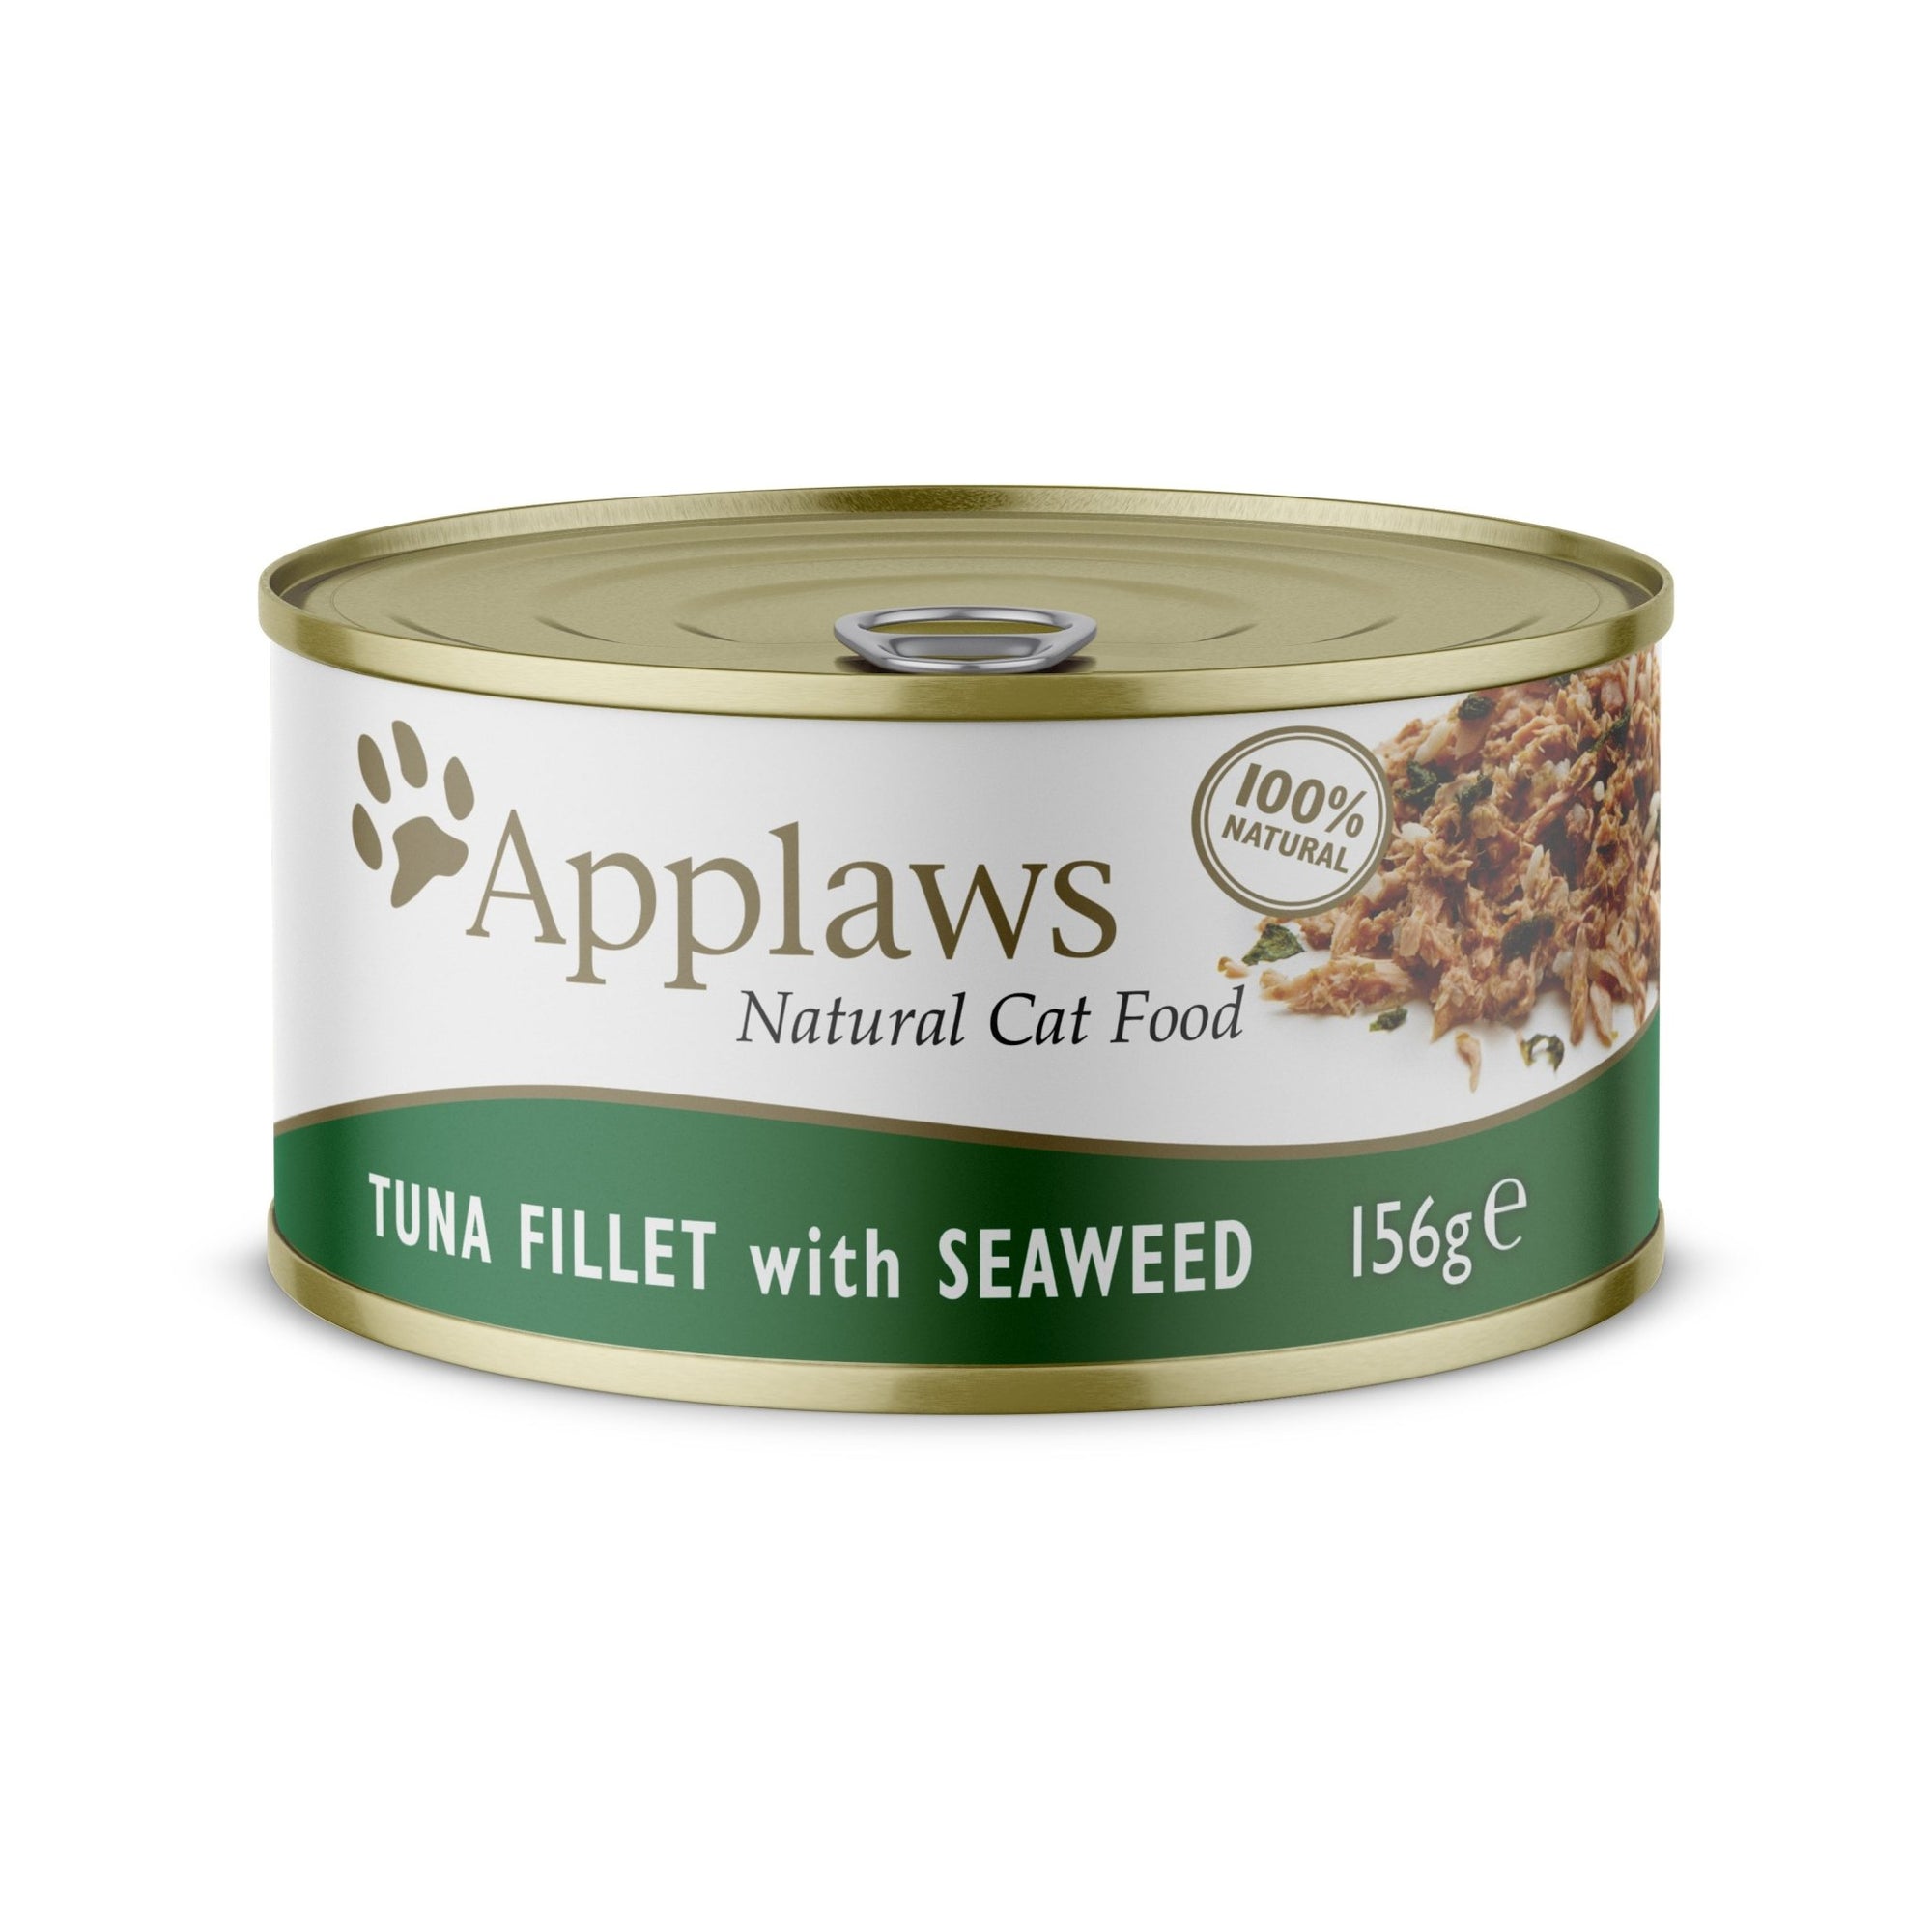 Applaws Cat Tuna Fillet with Seaweed in Broth Tins 24 x 156g, Applaws,